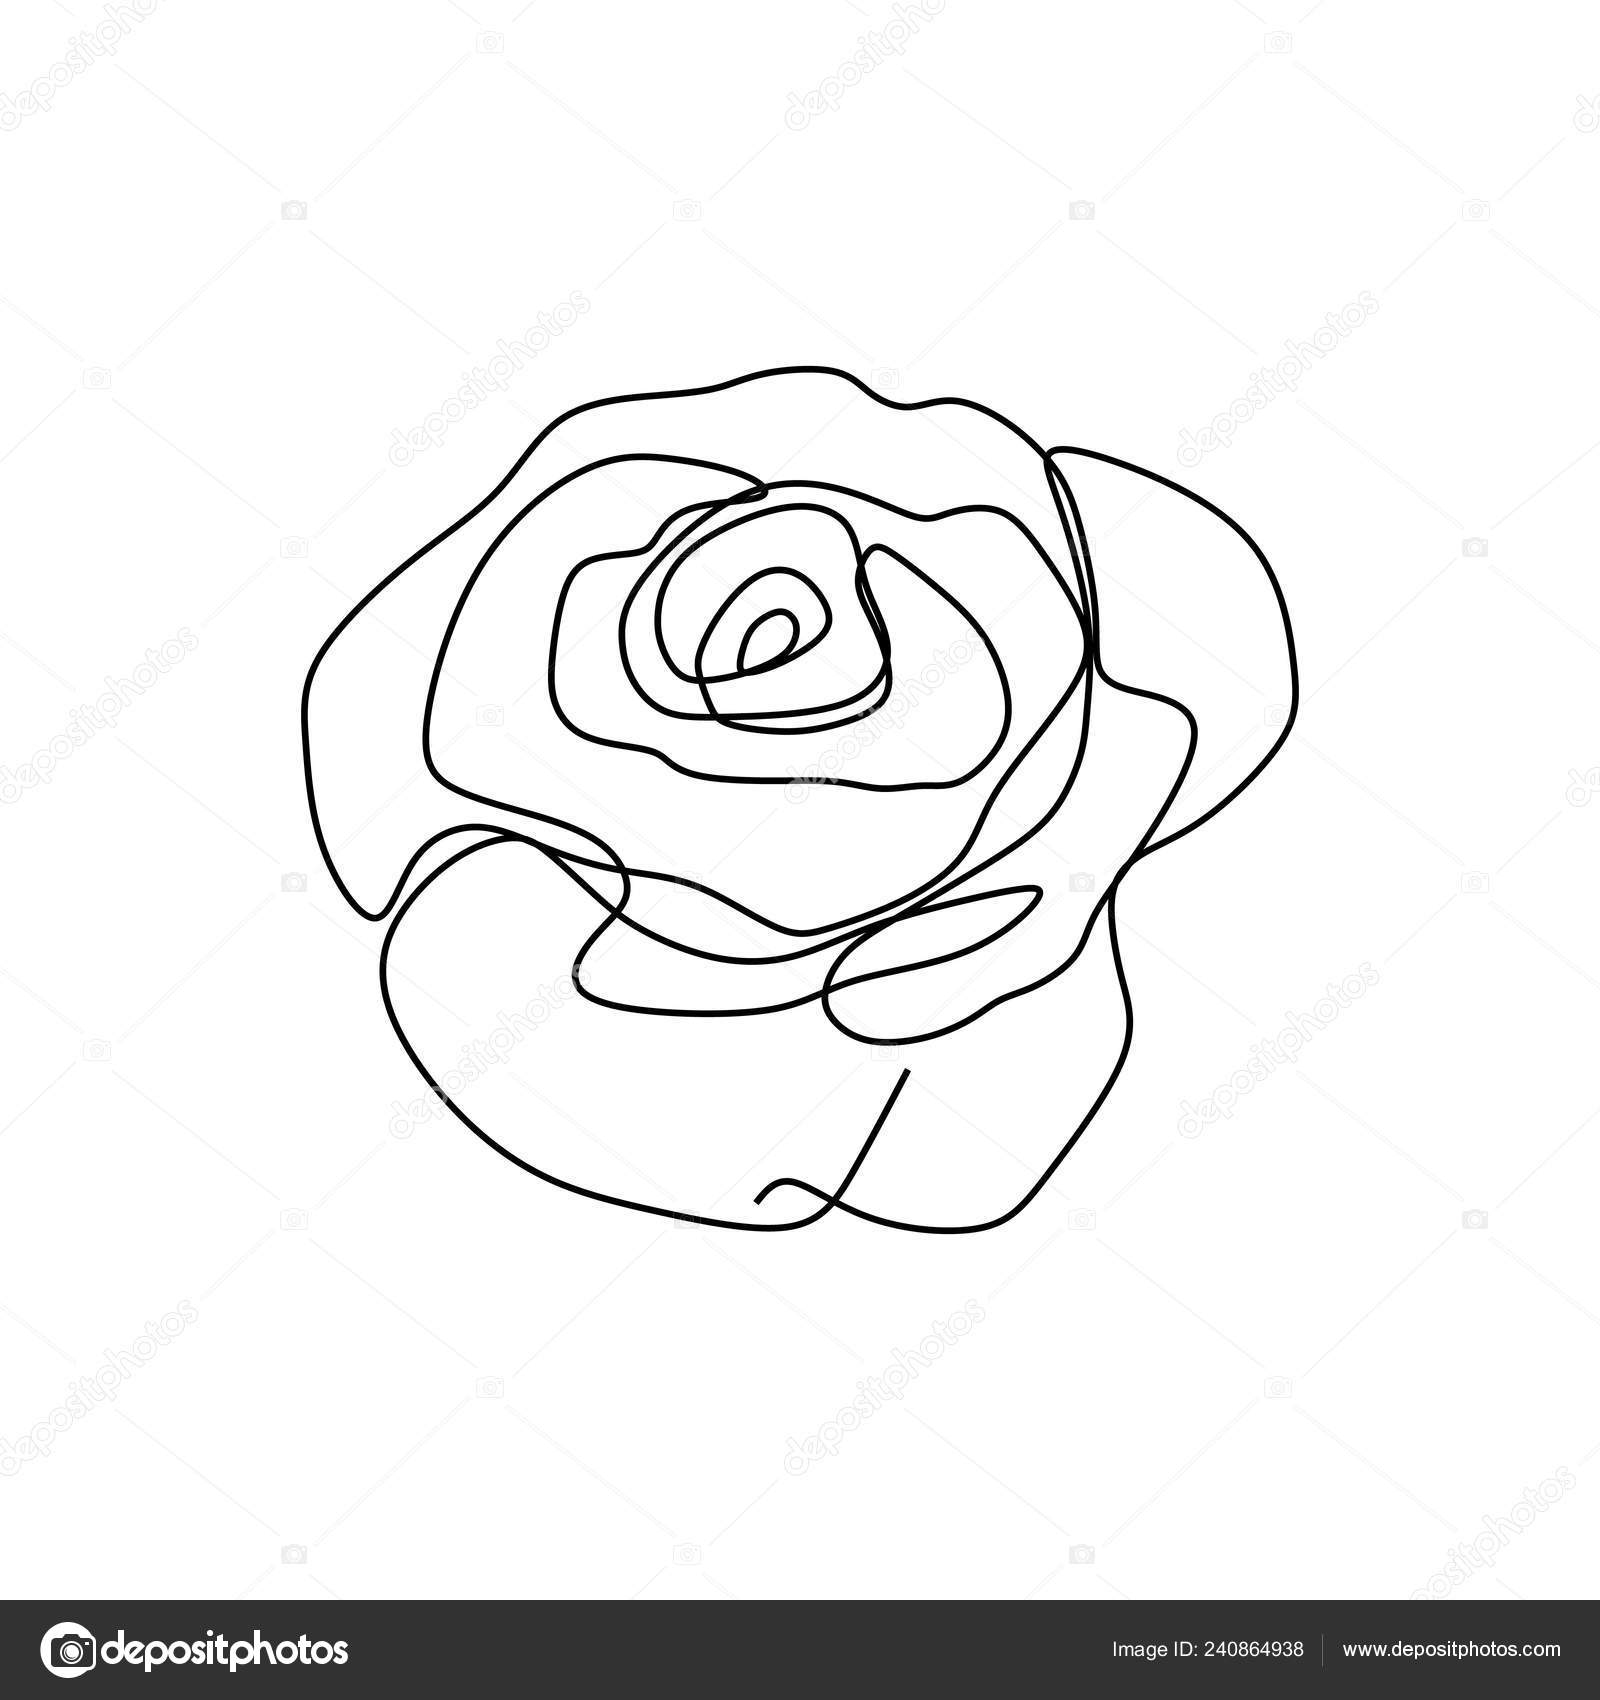 Rose Line Images | Free Photos, PNG Stickers, Wallpapers & Backgrounds -  rawpixel